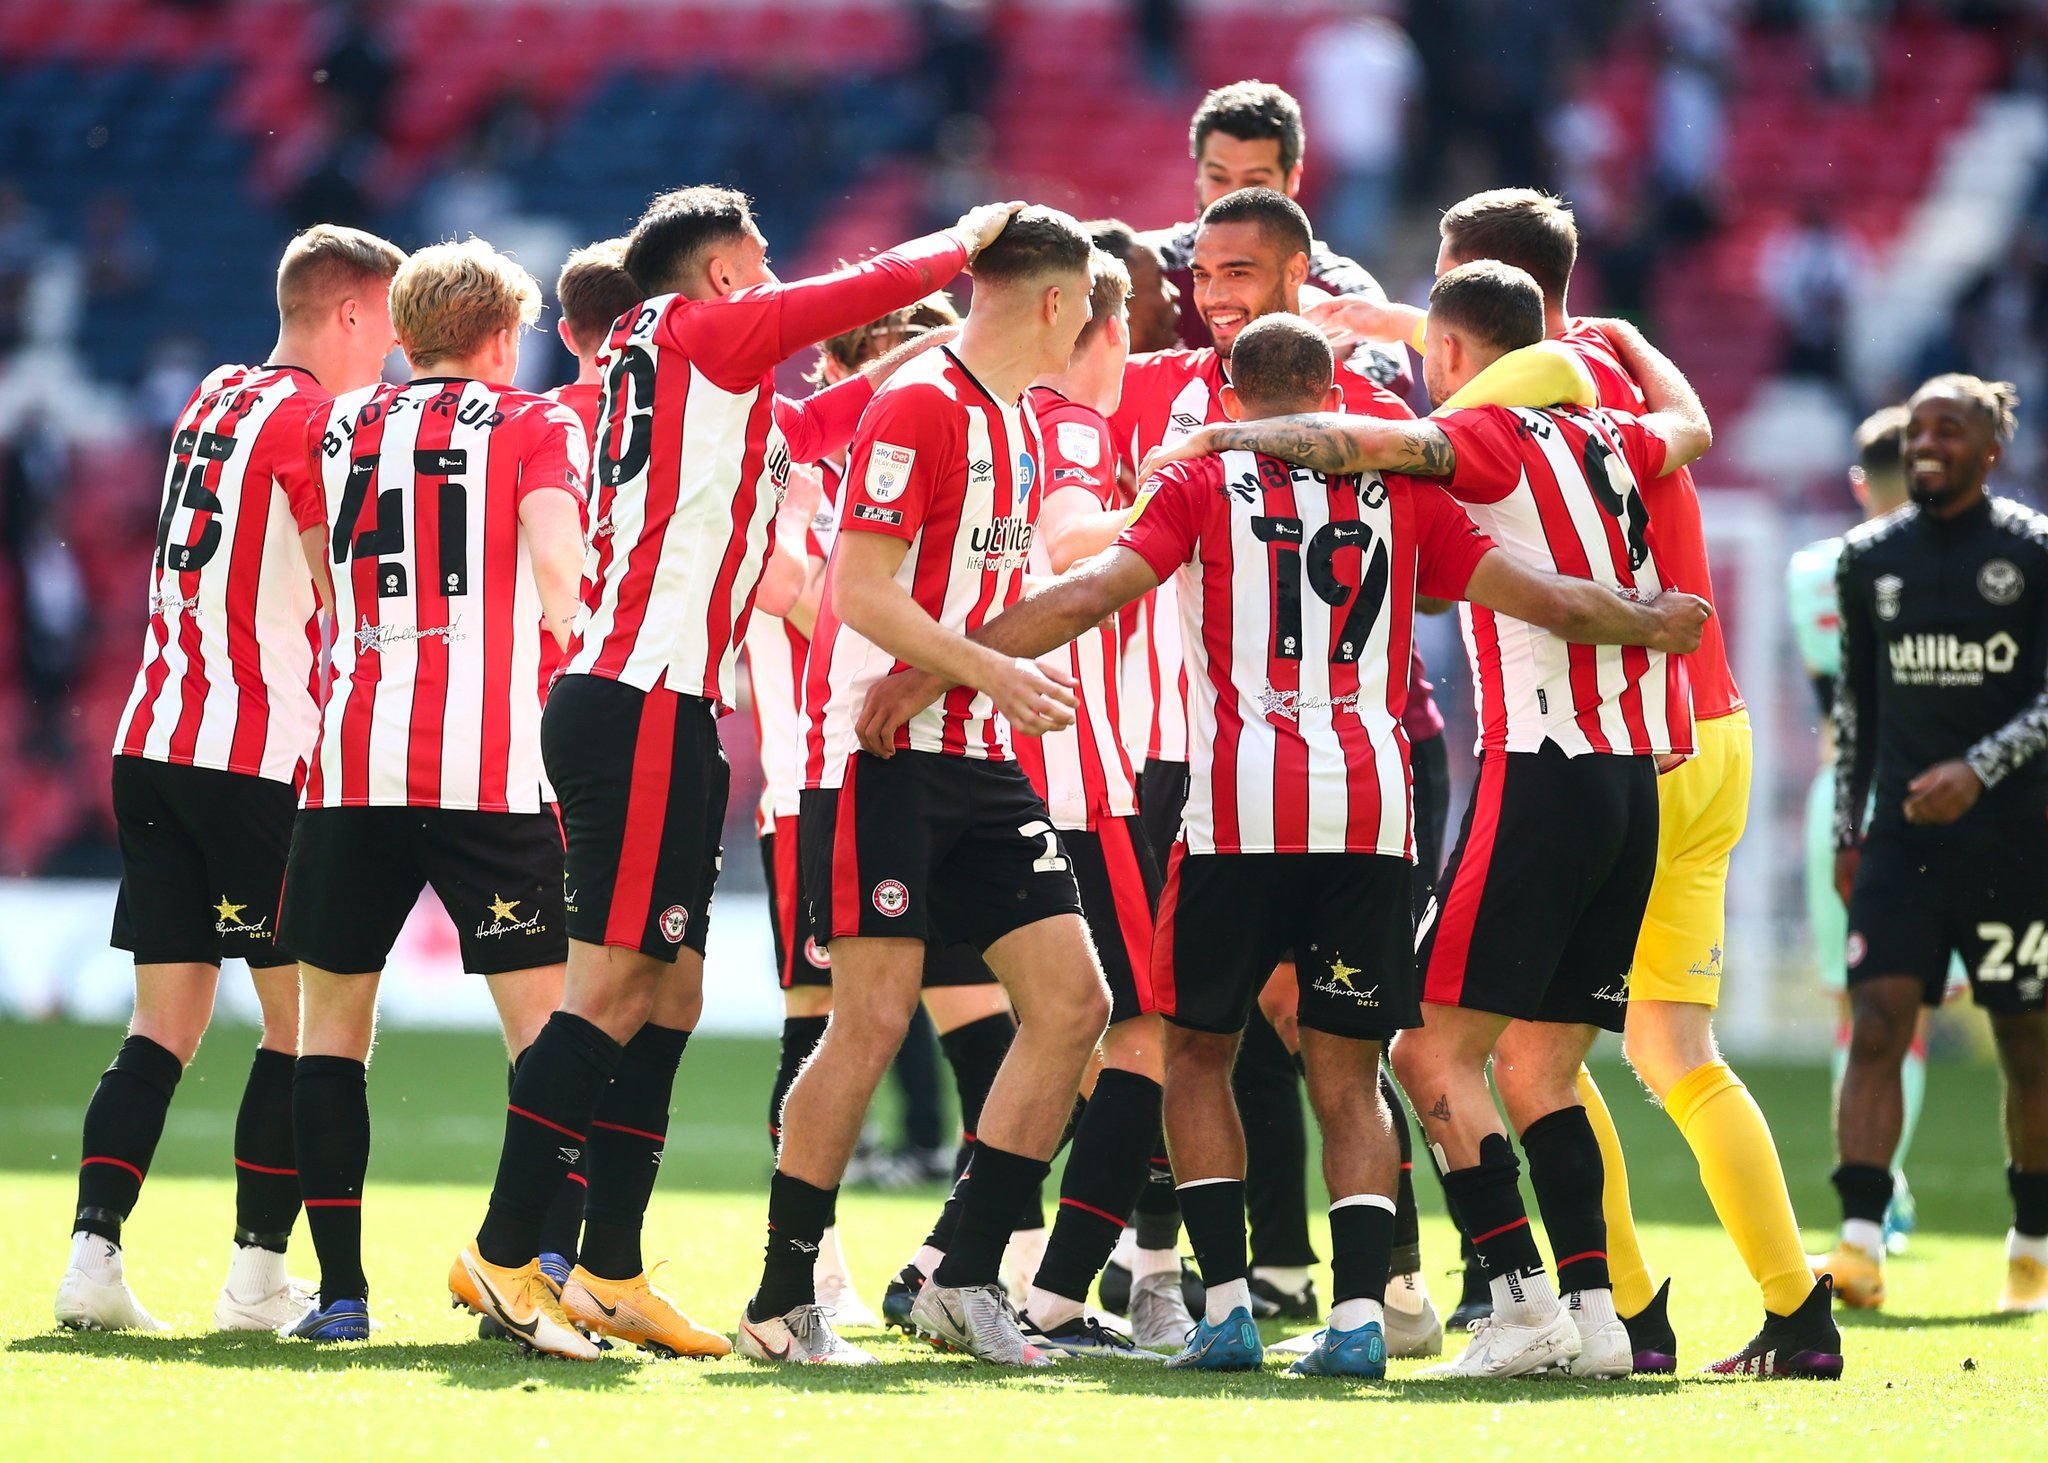 Brentford promoted to Premier League, back in top flight after 74 years